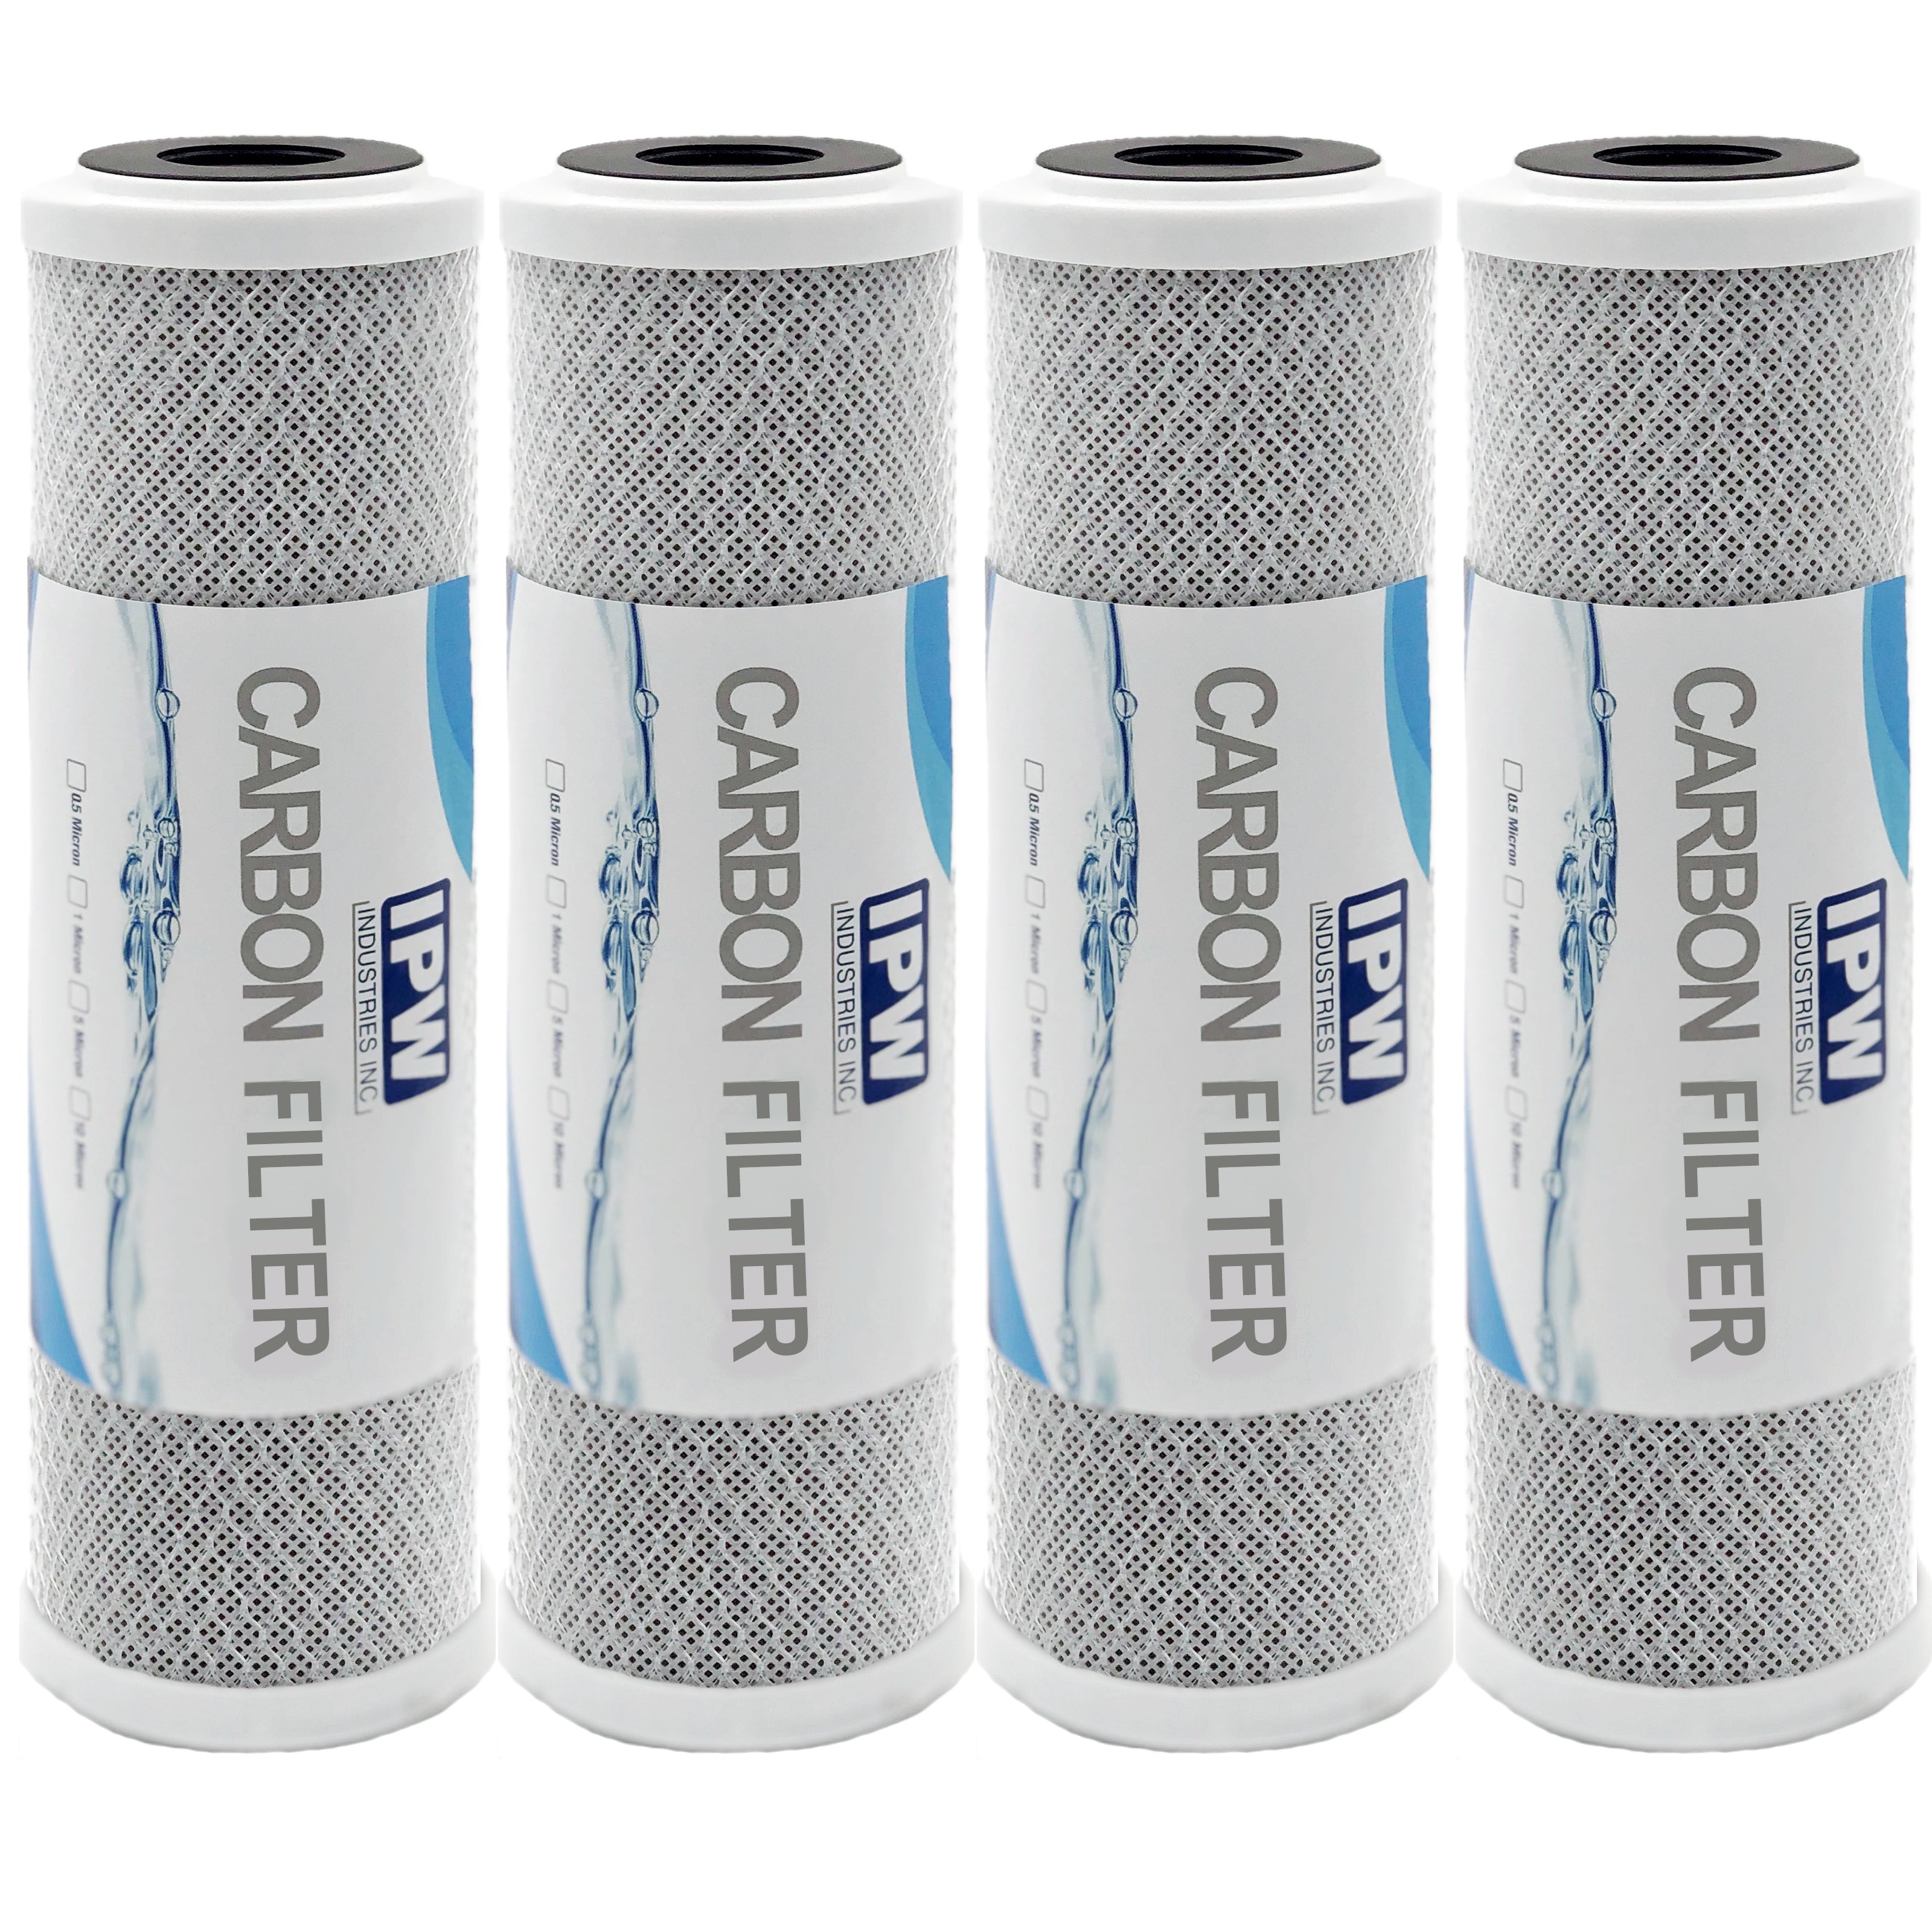 Ipw Industries Inc. Coconut Shell Water Filter Cartridge / Activated Carbon Block Cto / Universal 5 Micron 10 Inch Cartridge / Compatible With Dwc30001, Wfpfc8002, Fxwtc, Whef-whwc, Whkf-whwc (4-pack)